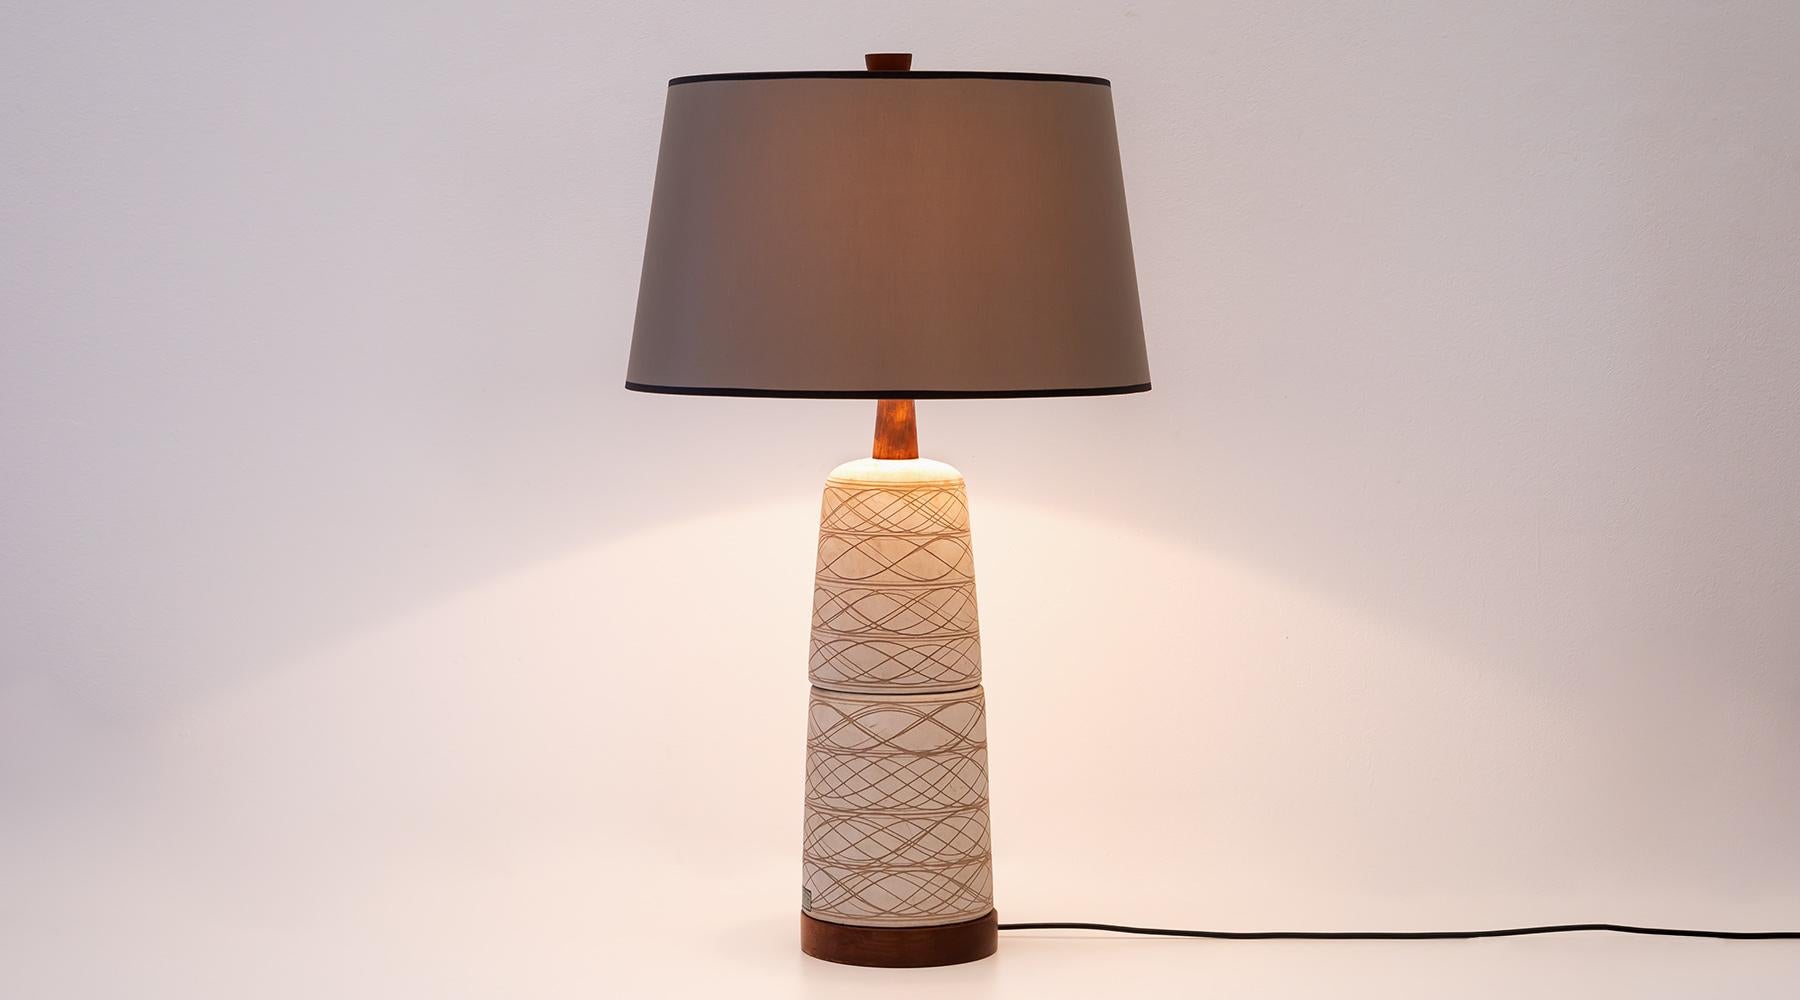 Table lamp, beige ceramic, light shadow, Jane and Gordon Martz, USA, 1954

Stunningly simple, attractive ceramic table lamp by the designers Jane & Gordon Martz. The lamp is in excellent condition. The ceramic base comes in sand colour and is